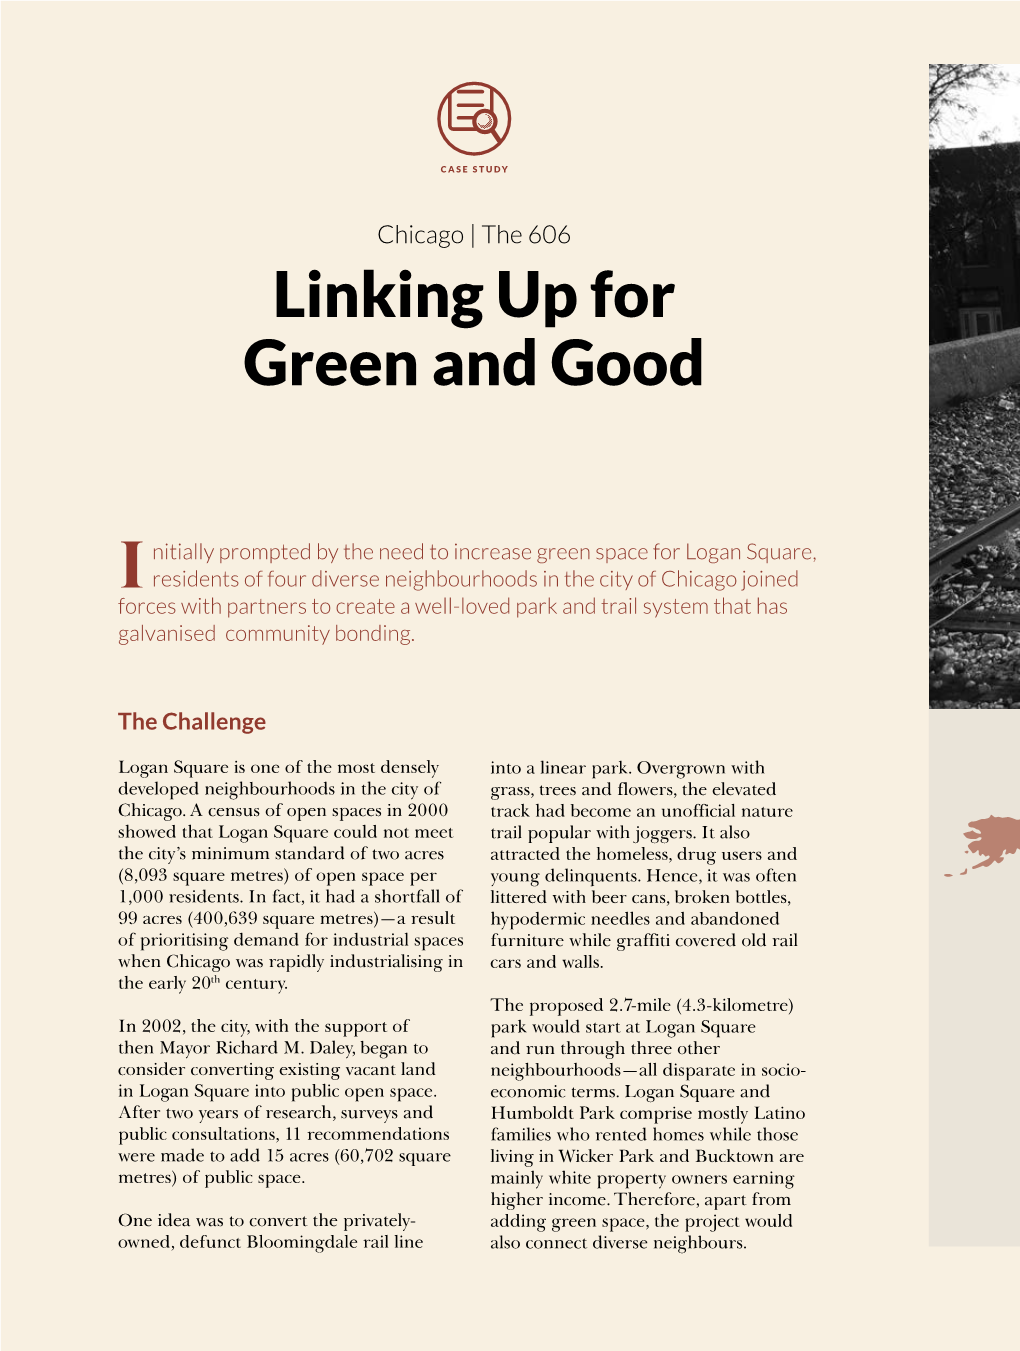 Linking up for Green and Good